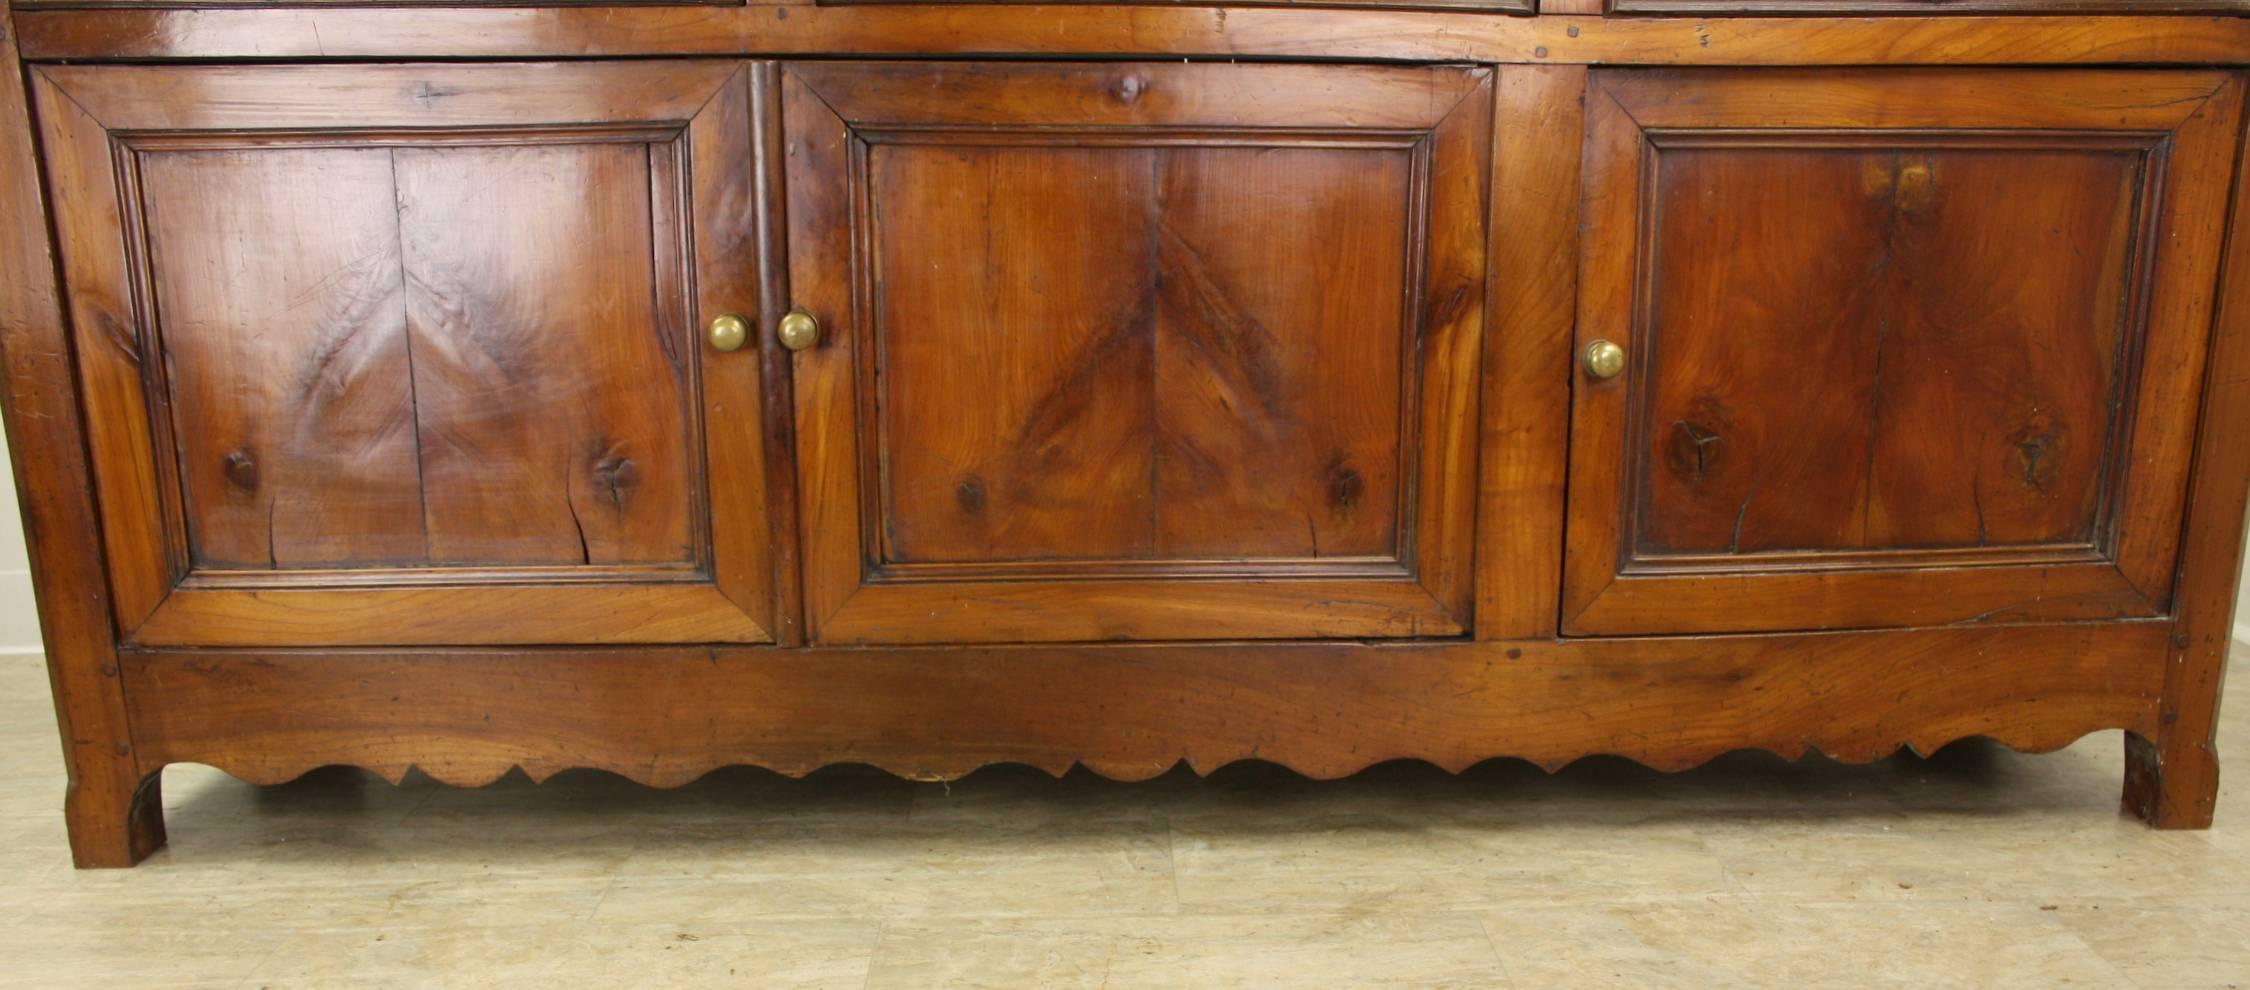 19th Century Dramatically Grained Antique Cherry Enfilade